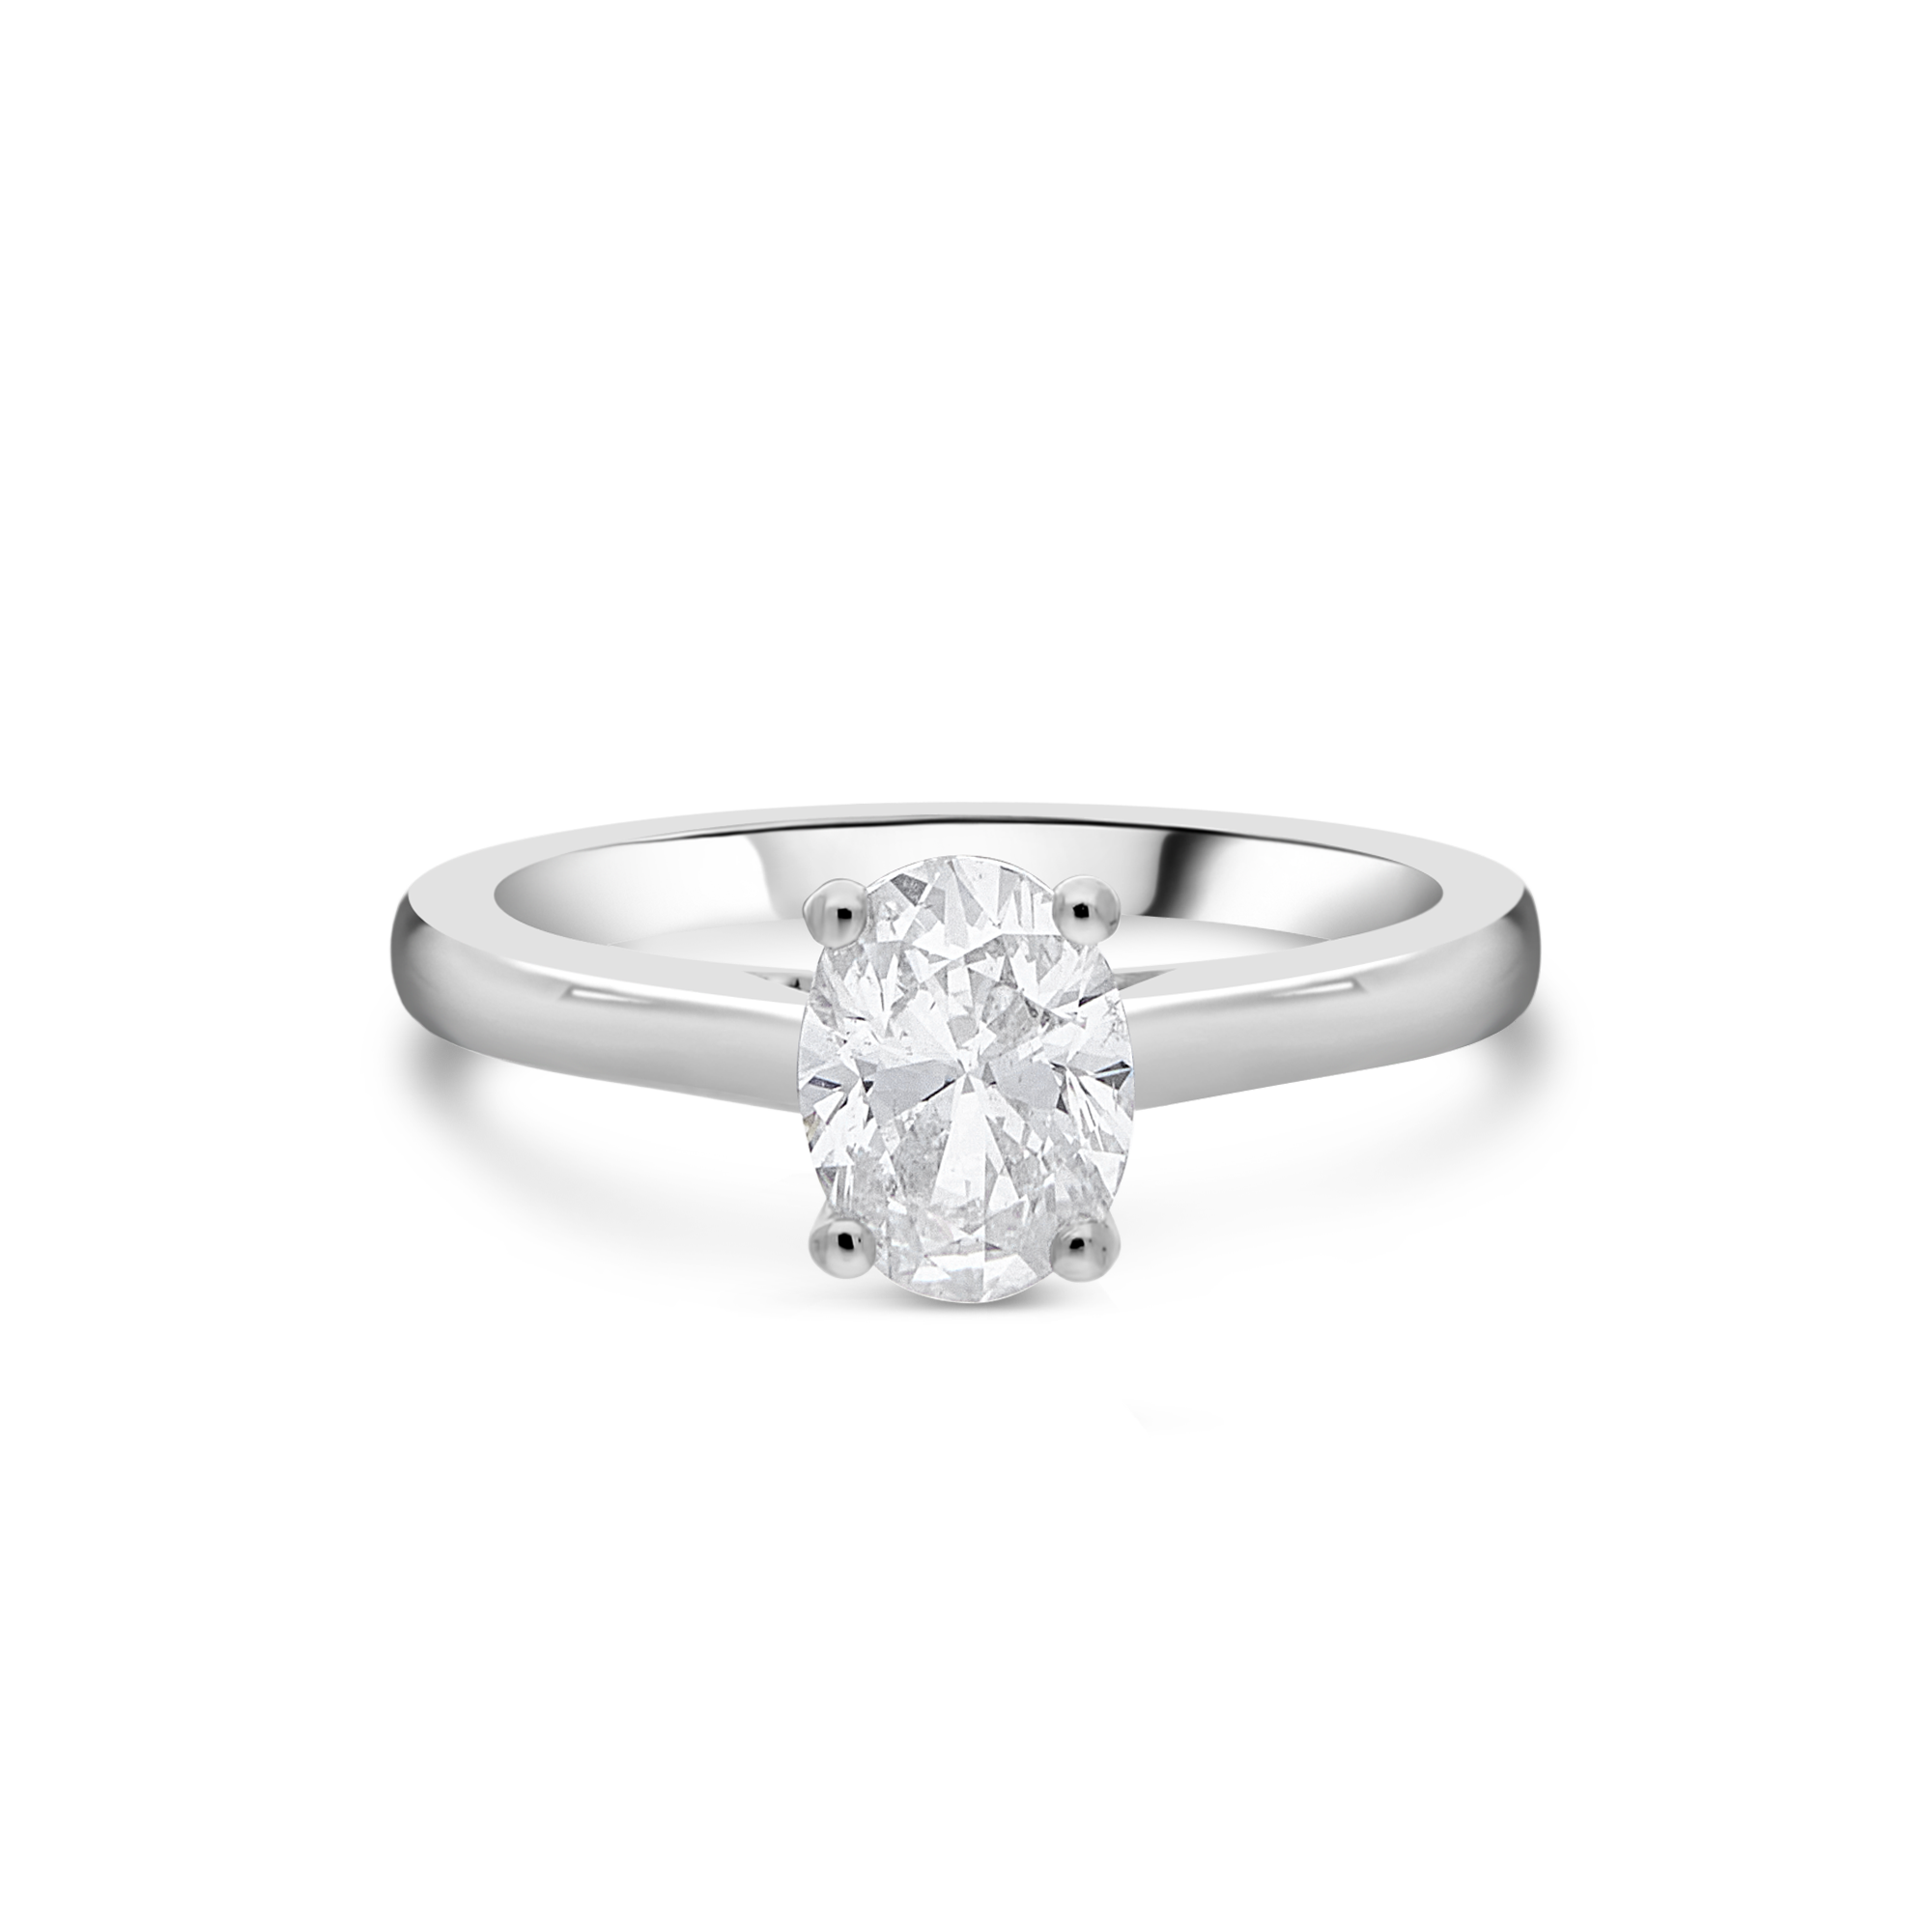 The "Peitho" Oval Solitaire, Platinum